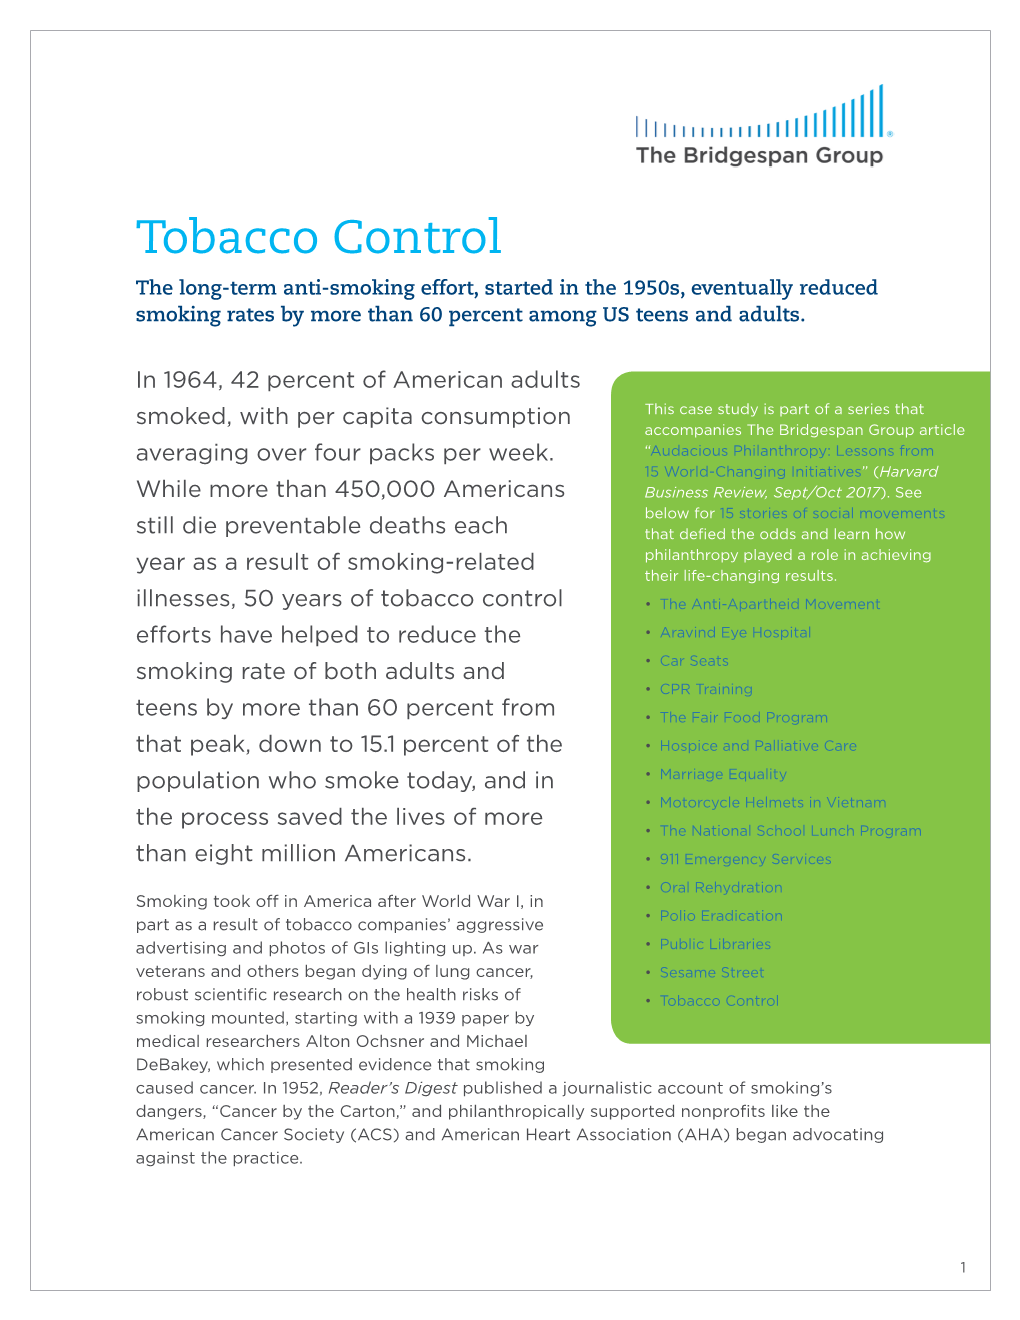 Tobacco Control the Long-Term Anti-Smoking Effort, Started in the 1950S, Eventually Reduced Smoking Rates by More Than 60 Percent Among US Teens and Adults